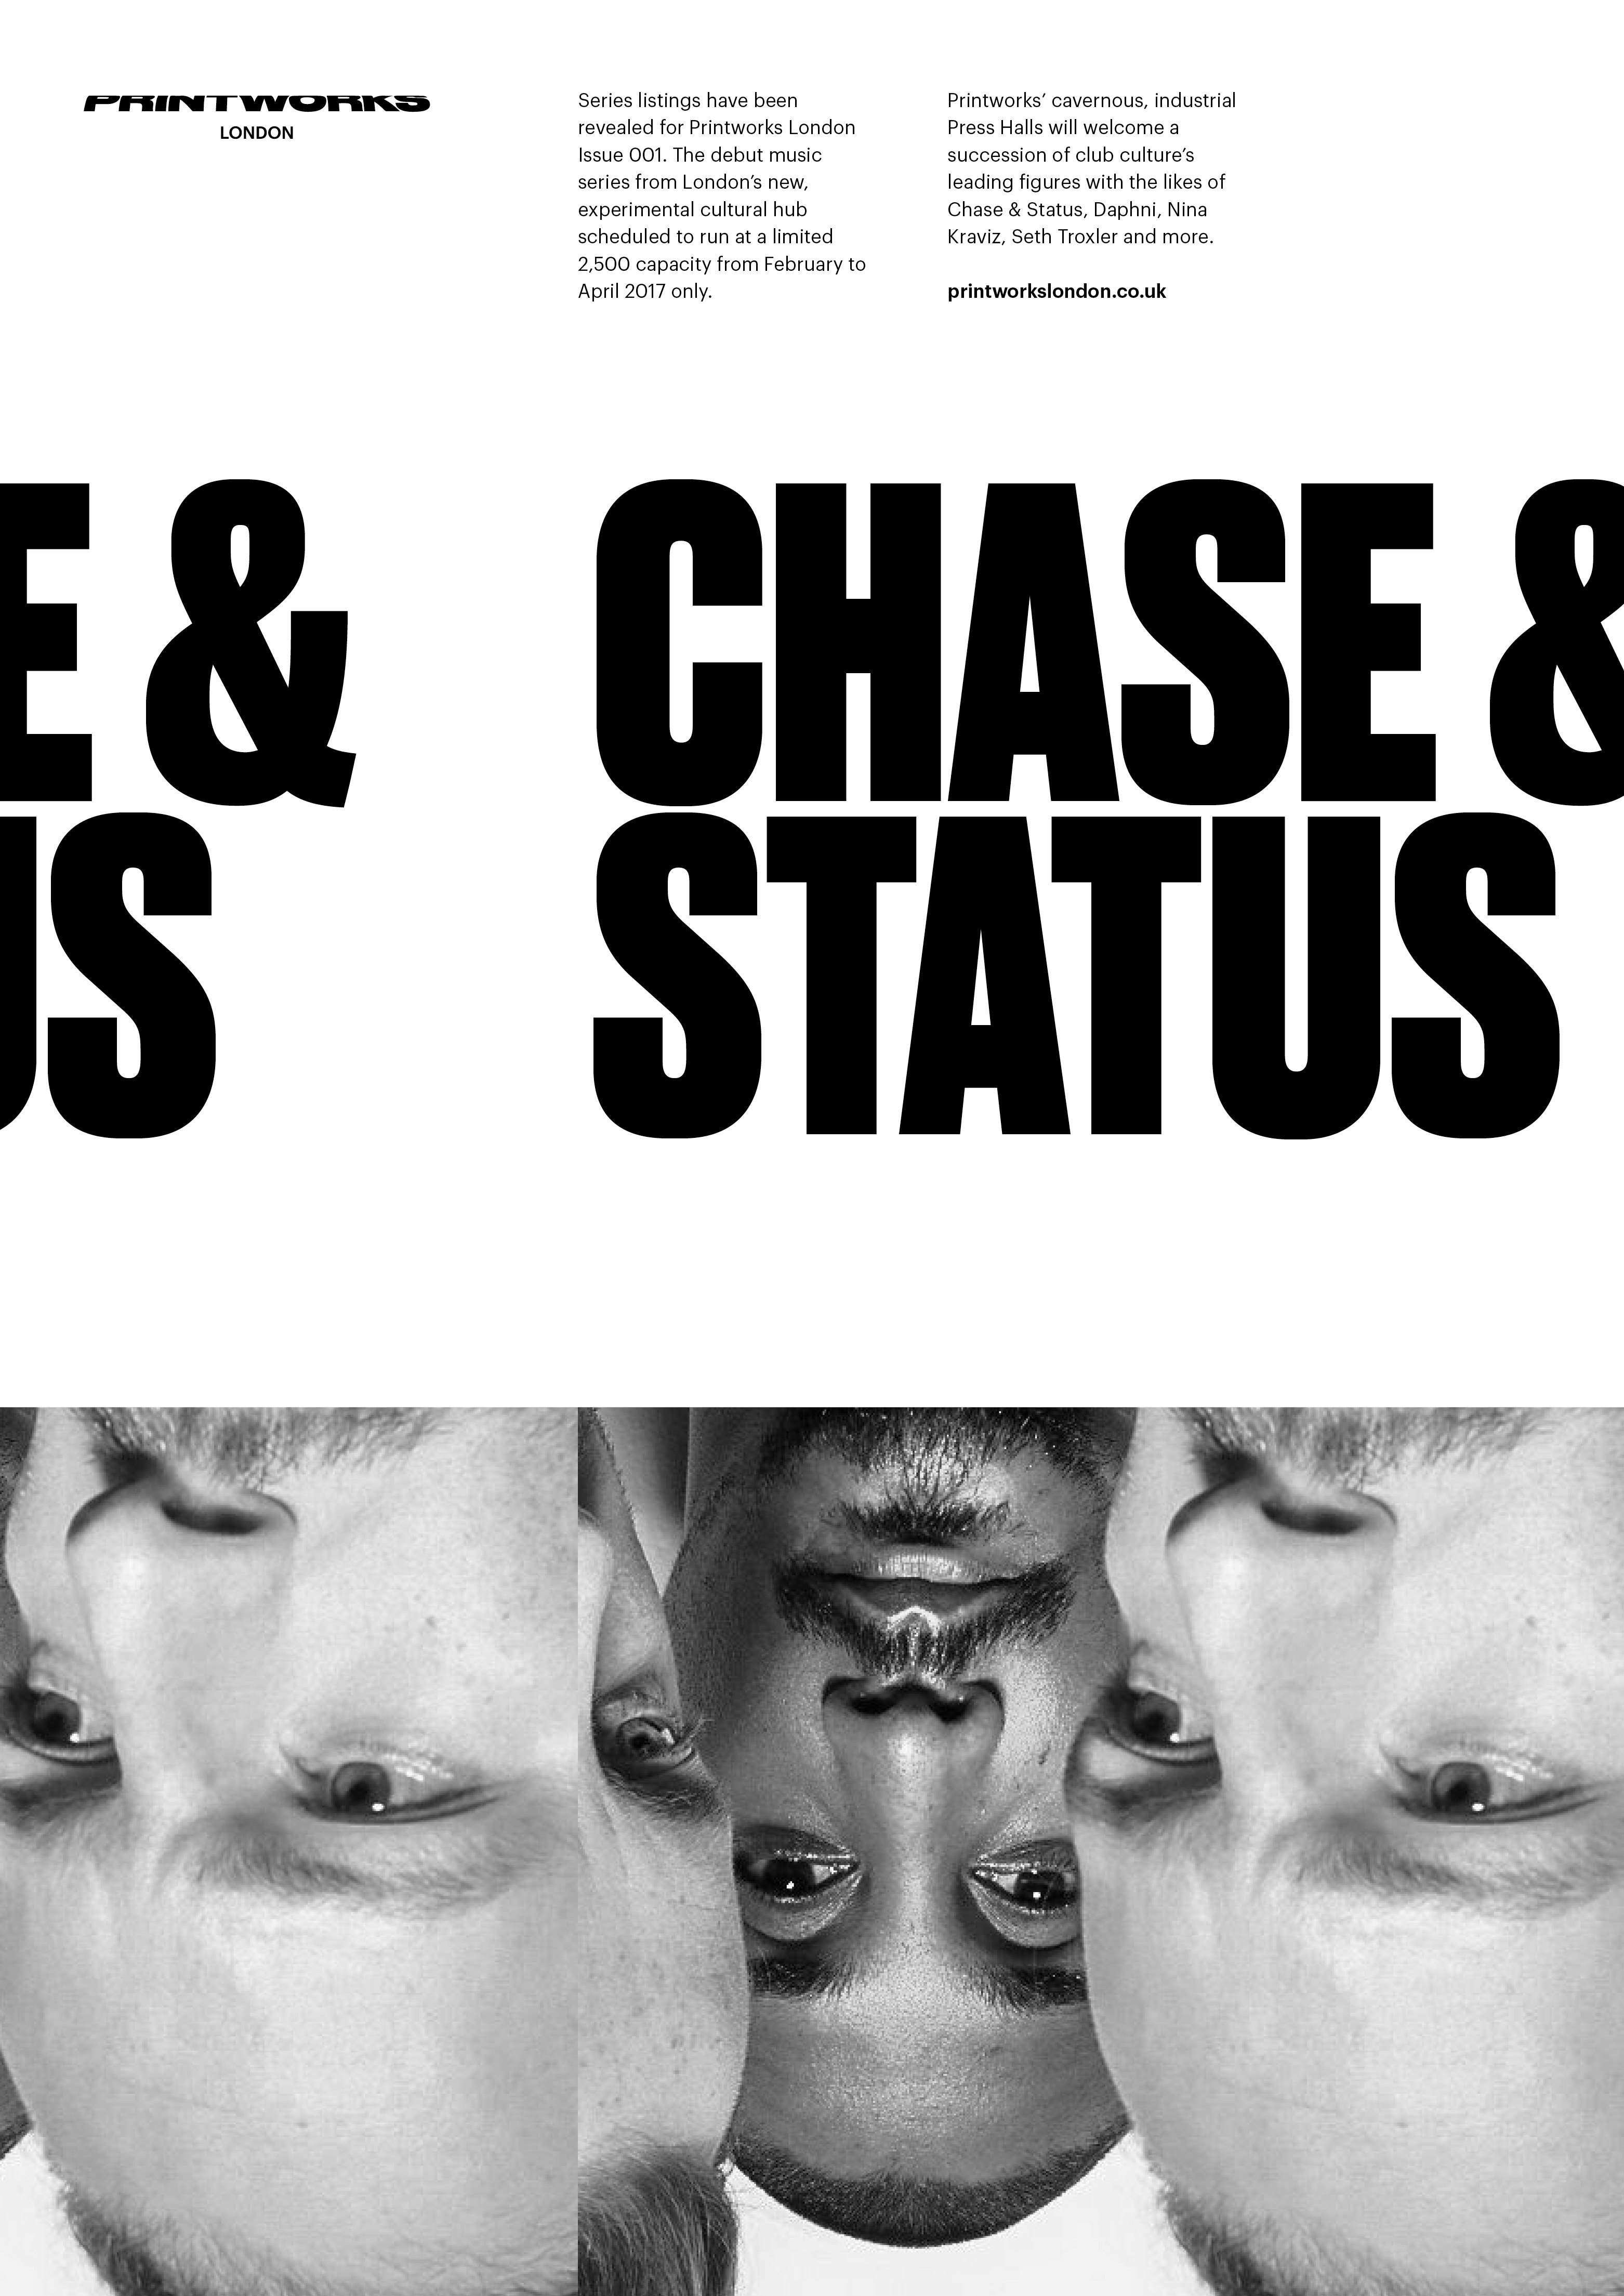 A design for a Chase & Status gig at Printworks London.